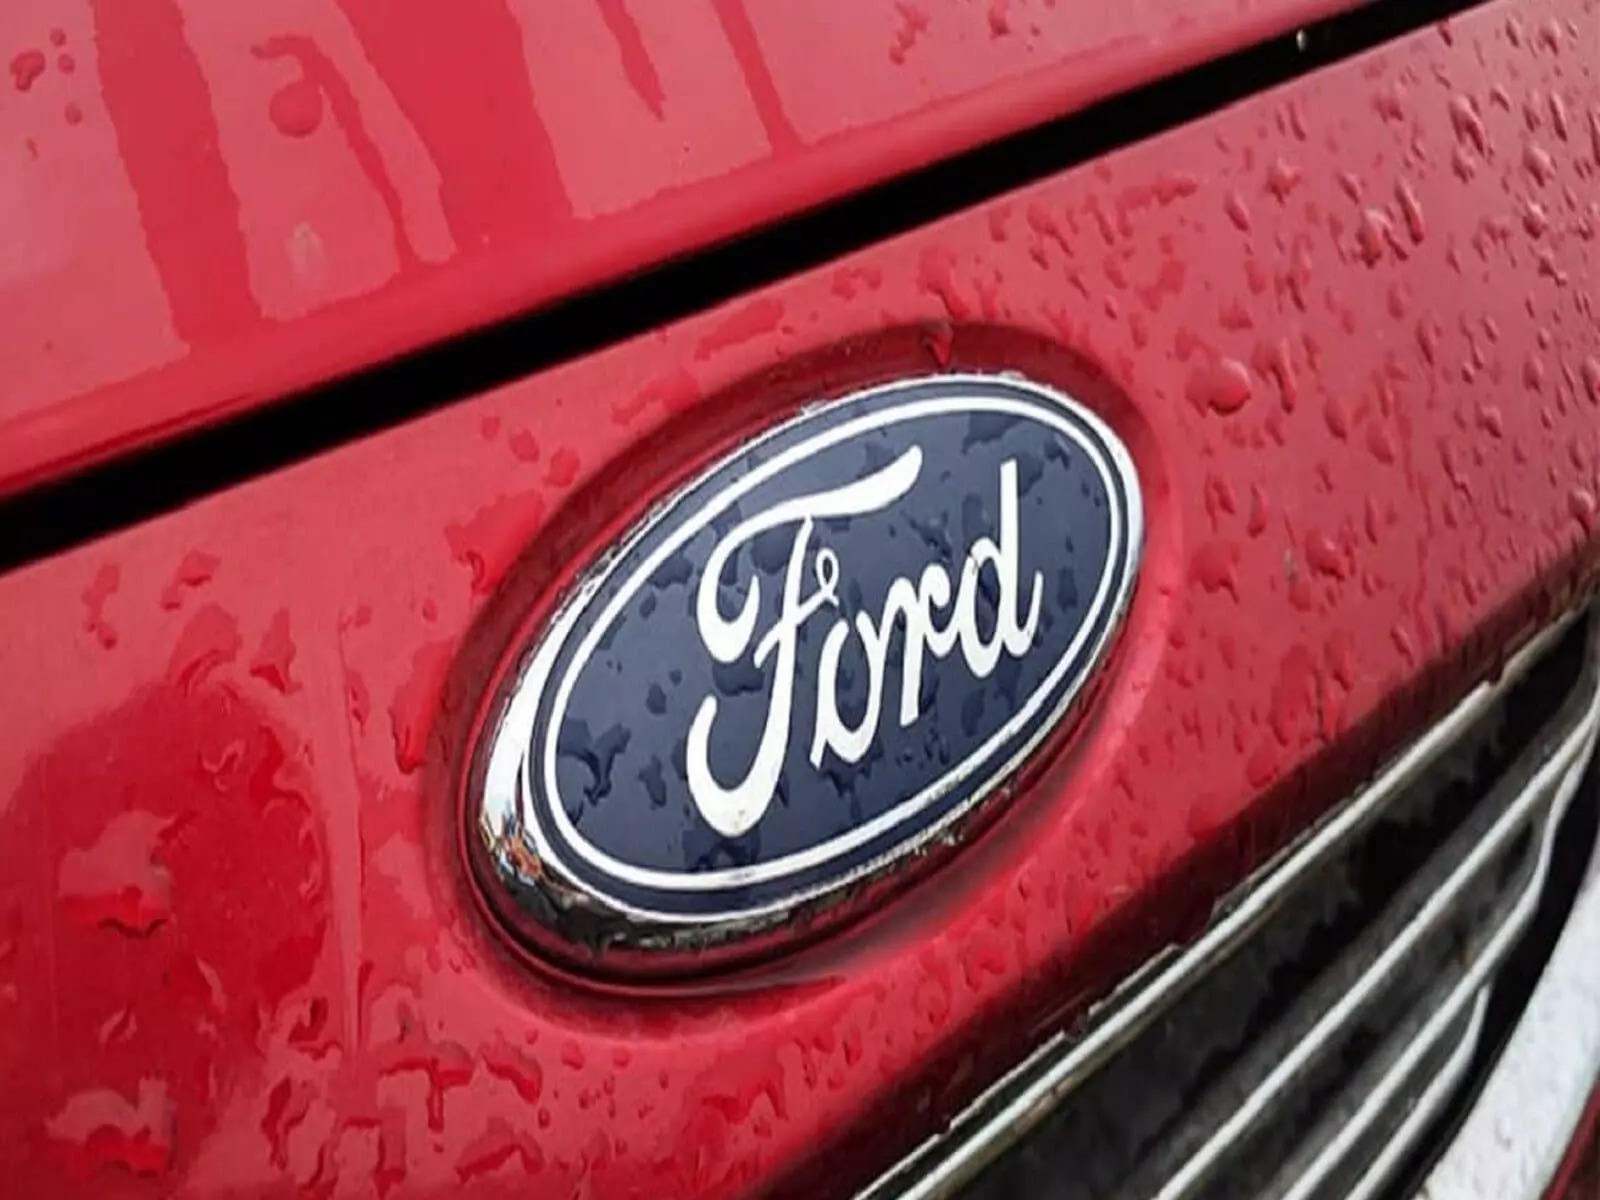 Ford Auto Sales 2021: Ford posts 7% fall in 2021 U.S. auto sales